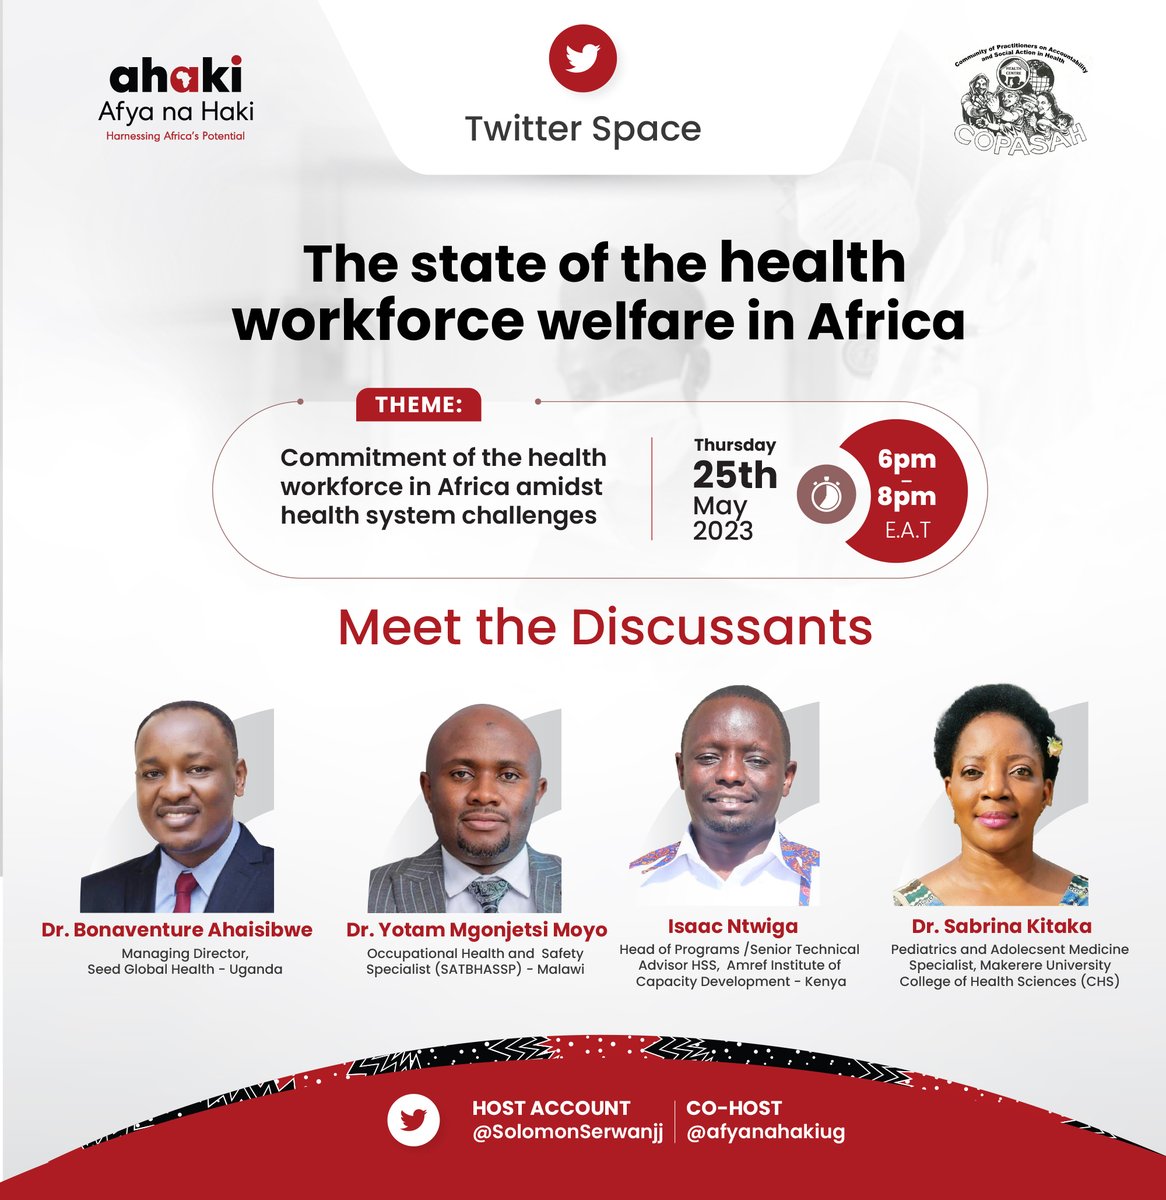 Meet the discussants bringing vast experience in the health arena. Discussions on the State of the #healthworkforce in Africa, and strategies to ensure the commitment of the health workforce amidst health system challenges among other issues will be tackled.
Today, 6 - 8 PM EAT.